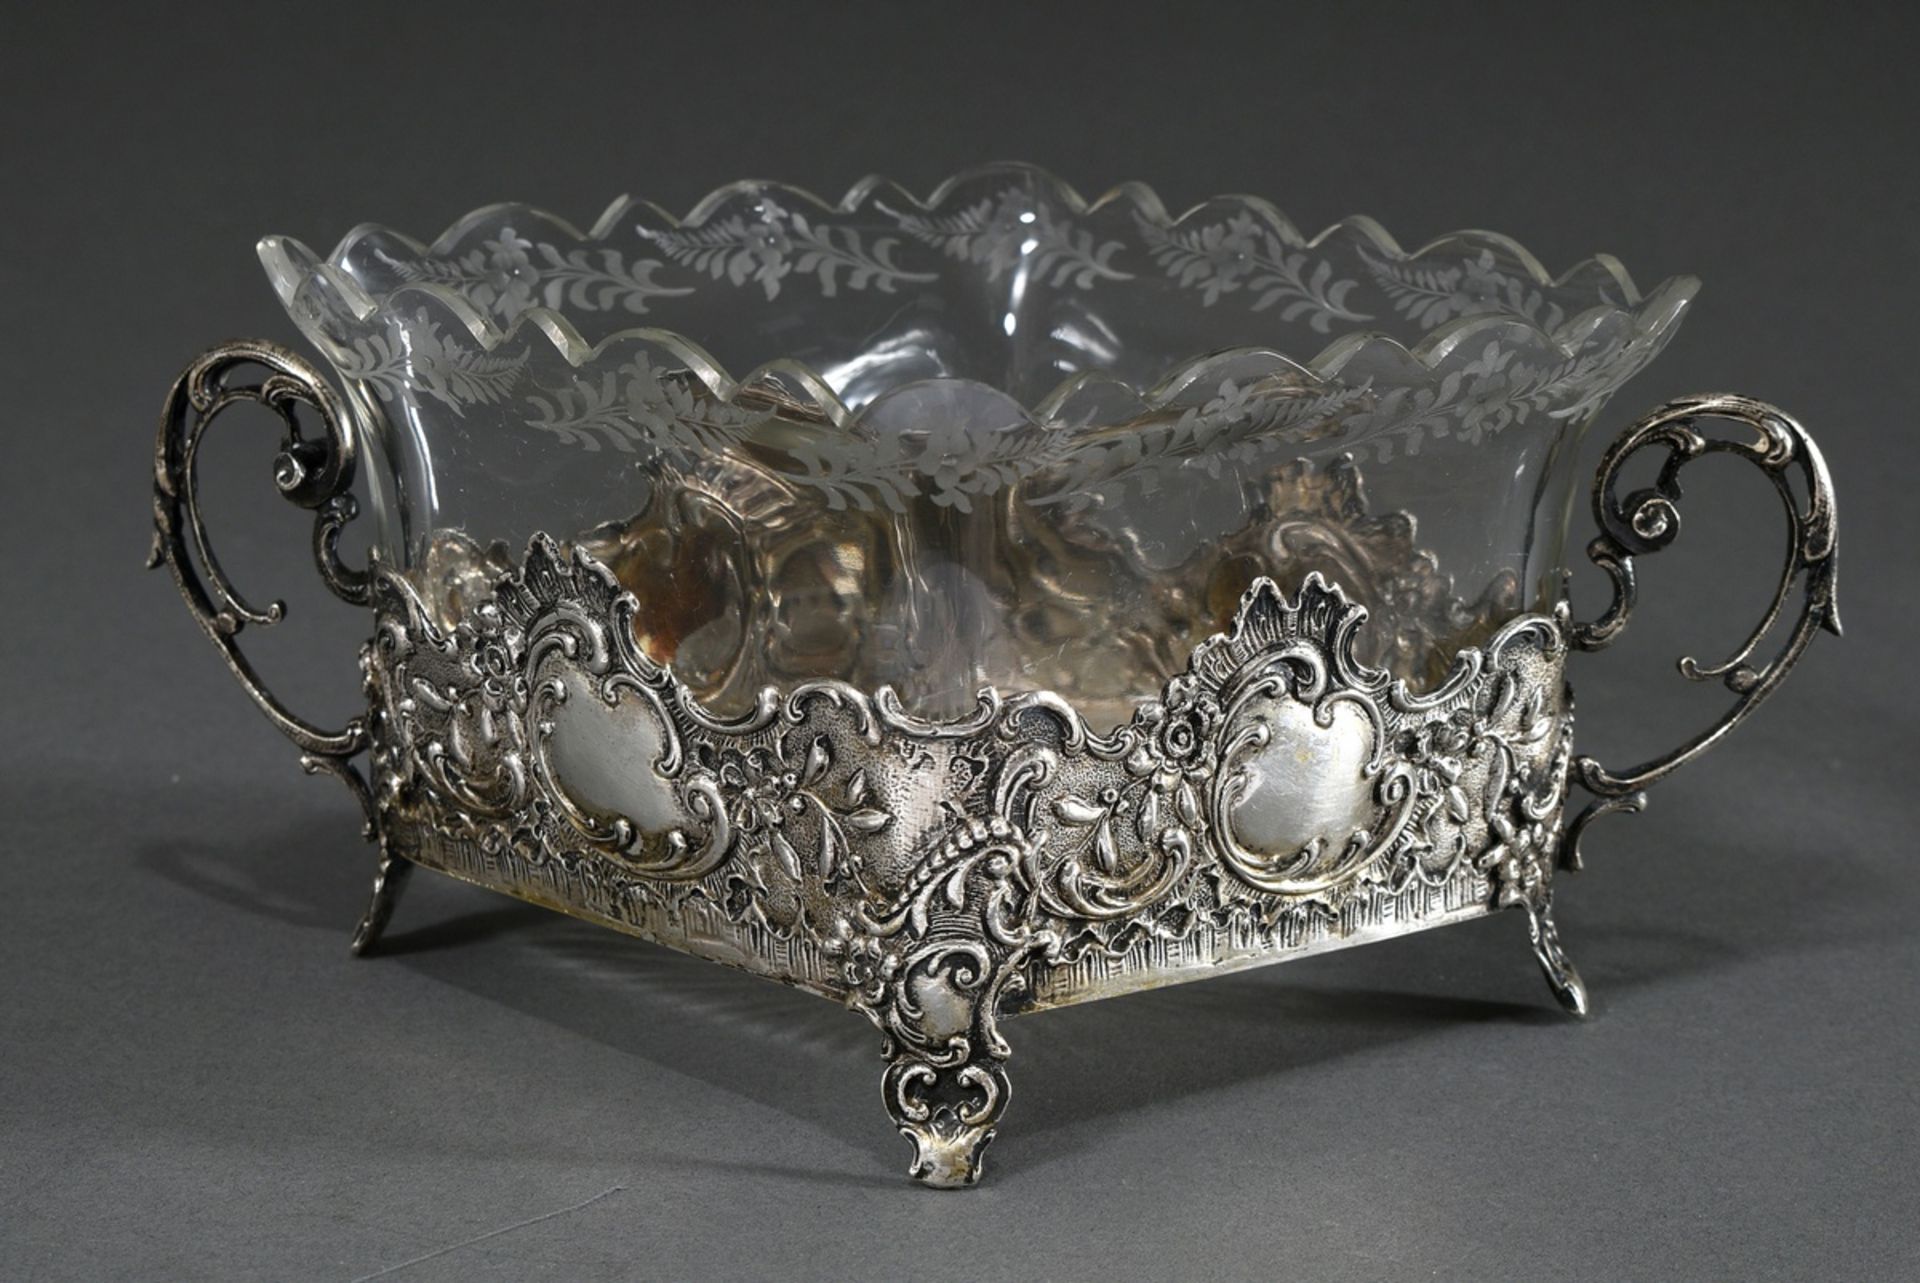 A rhombus-shaped biscuit dish in neo-rococo style on small feet with ornamental handles and floral  - Image 2 of 6